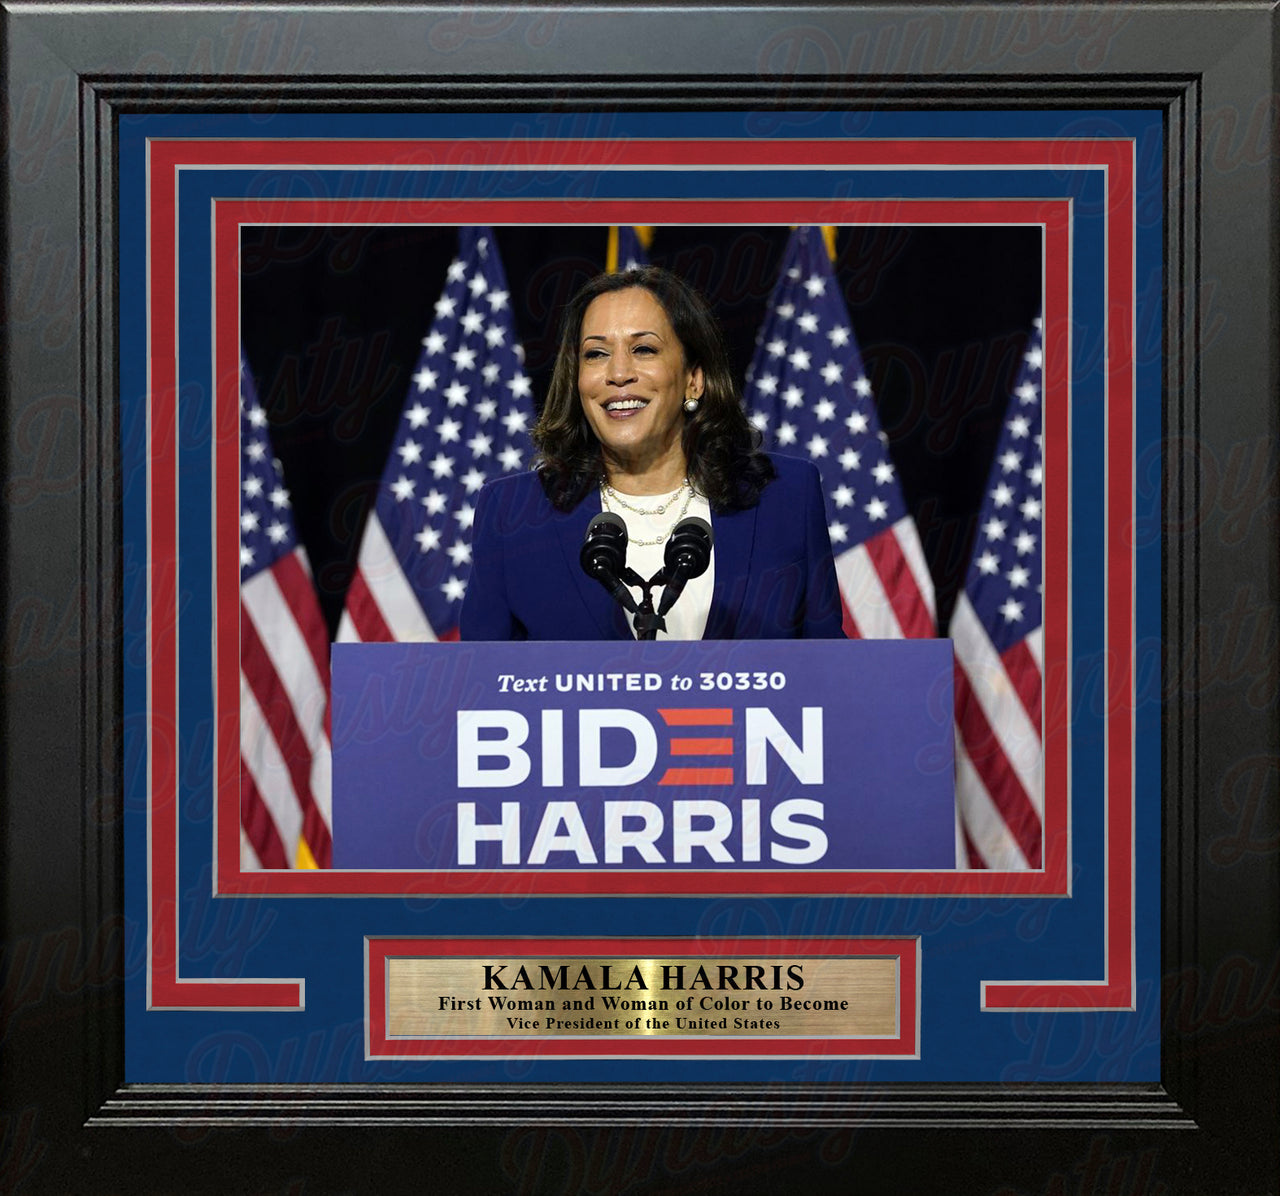 Kamala Harris First Woman of Color As Vice President 8" x 10" Framed Photo - Dynasty Sports & Framing 